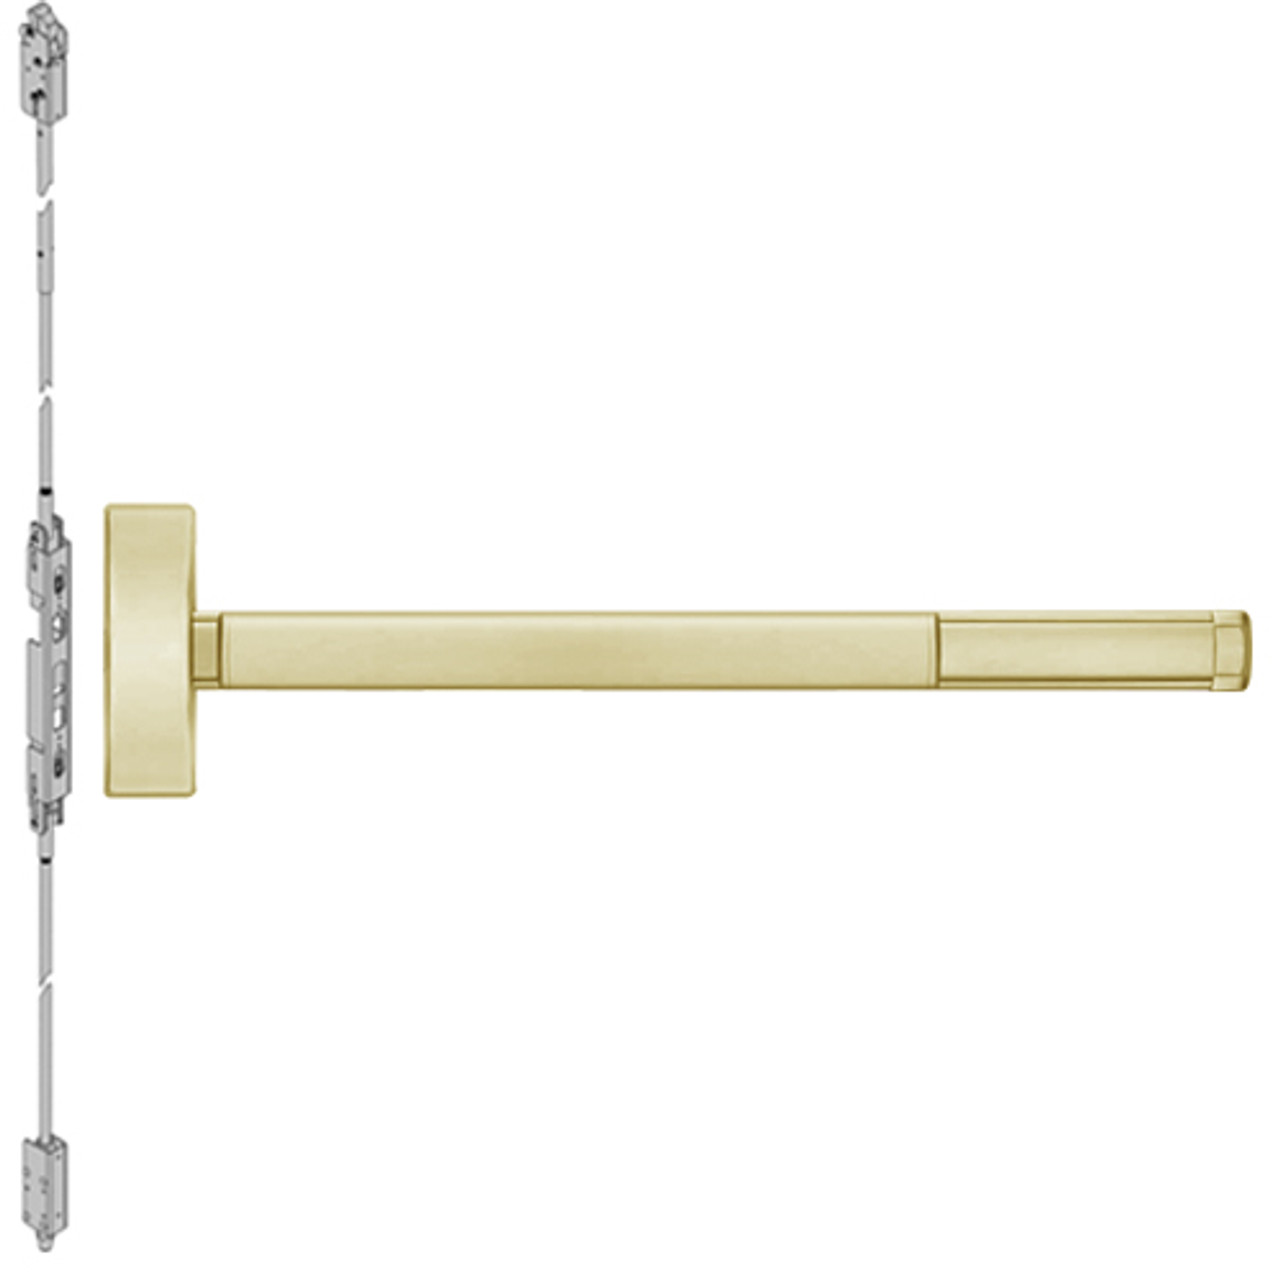 ELRFL2801-606-48 PHI 2800 Series Fire Rated Concealed Vertical Rod Exit Device with Electric Latch Retraction Prepped for Cover Plate in Satin Brass Finish